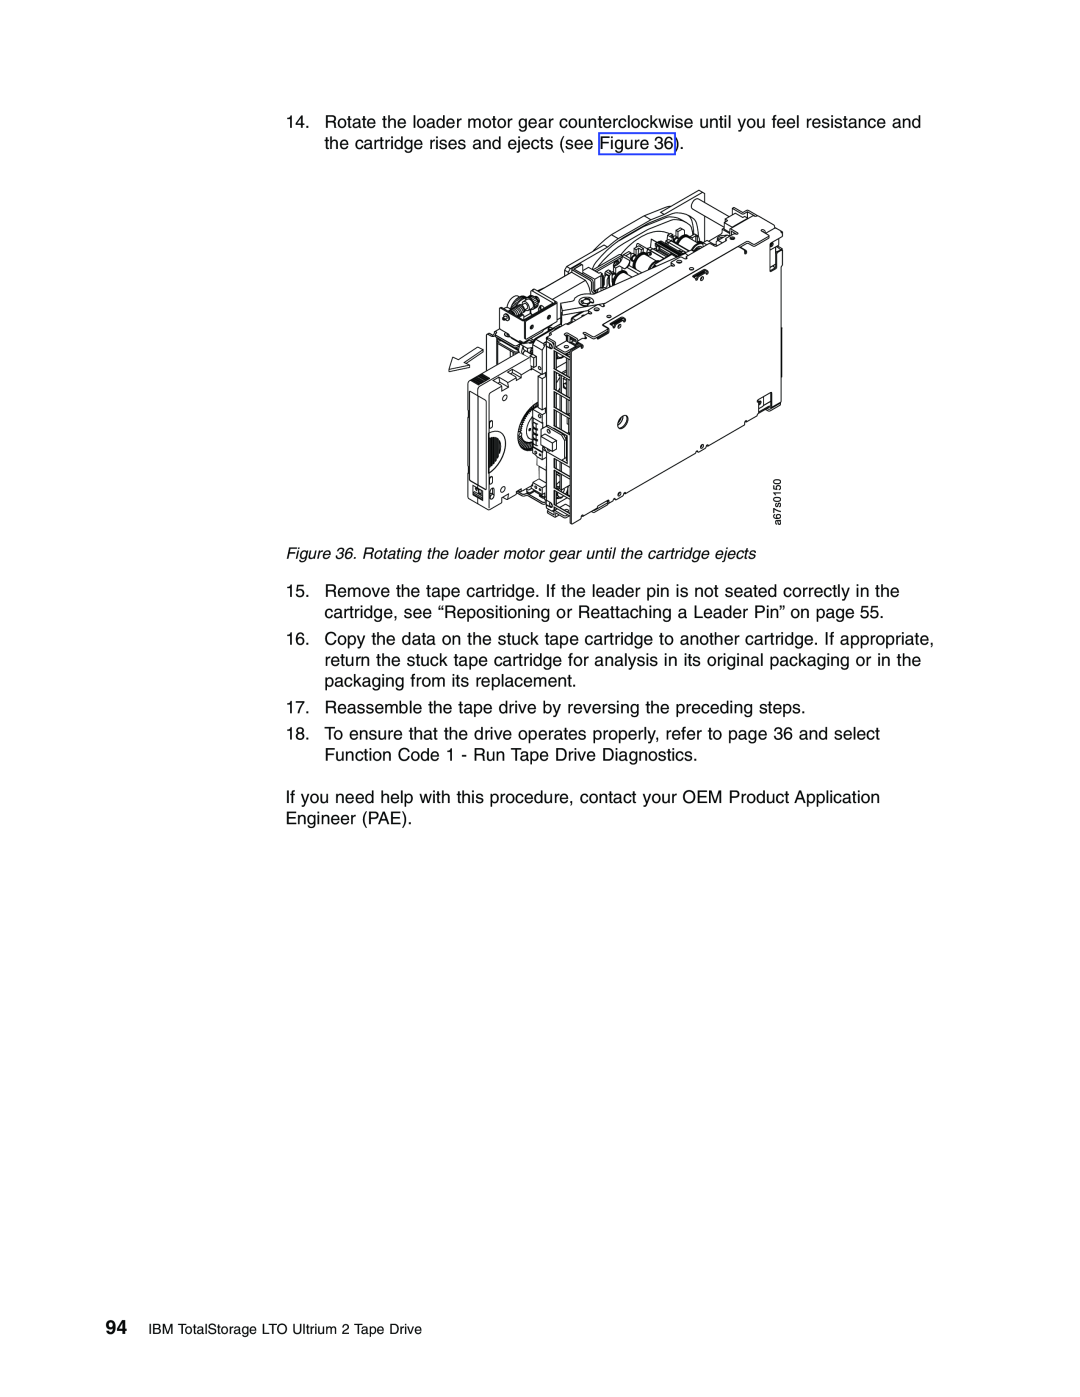 IBM T400F manual Reassemble the tape drive by reversing the preceding steps 